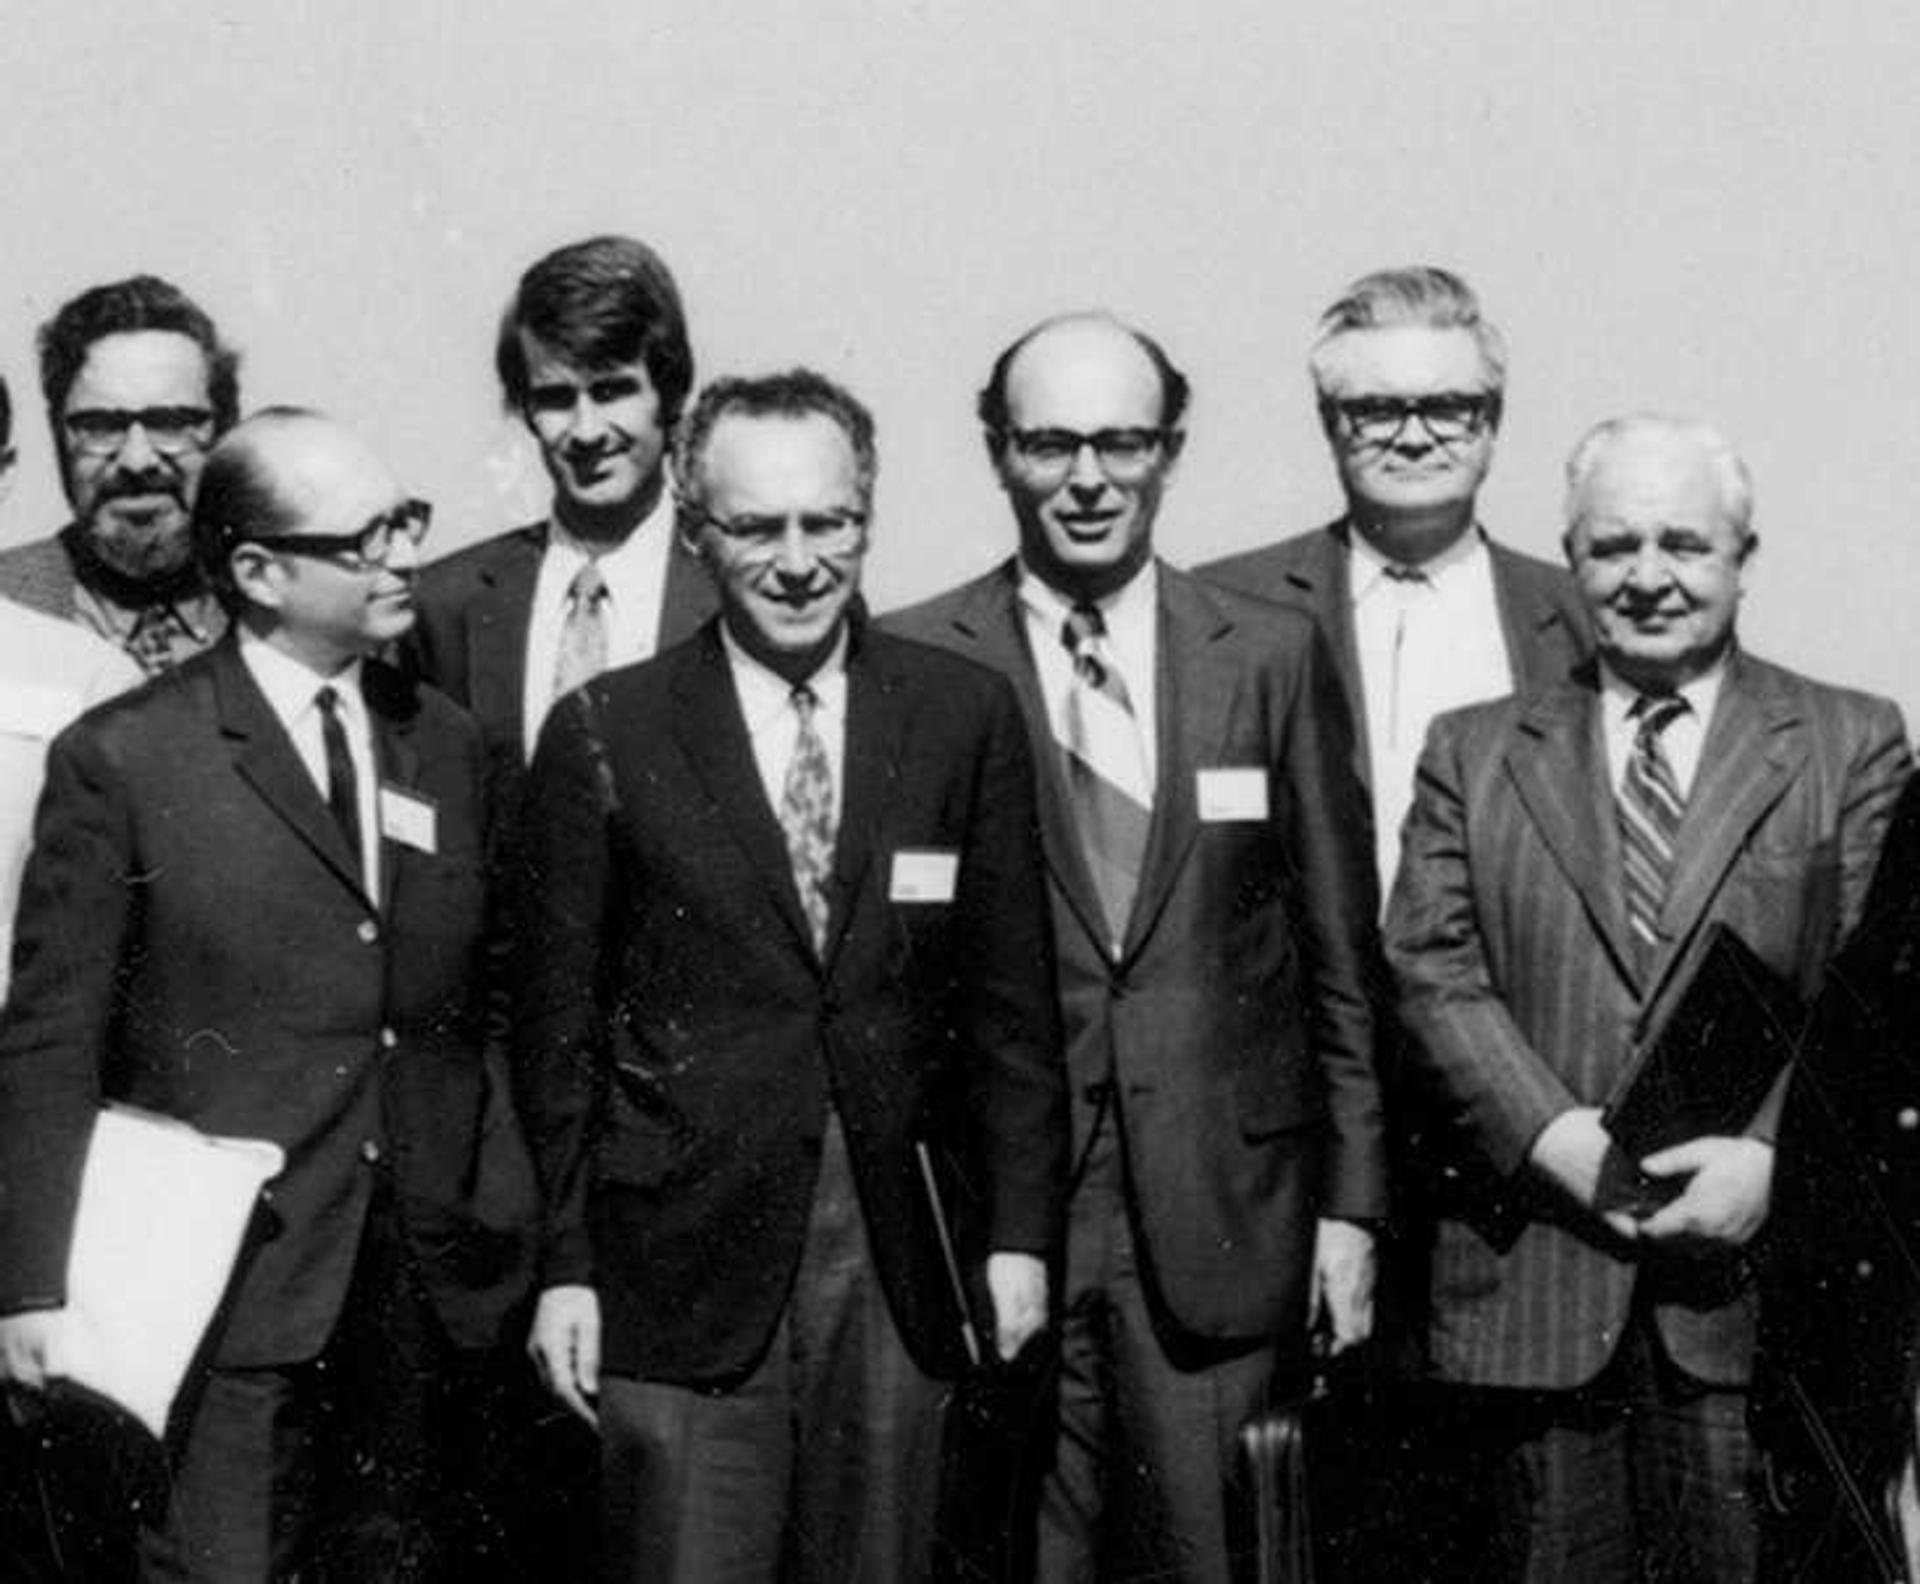 I attended a conference at the Western White House, organized by the UC Irvine Department of Physics. A very prominent group of researchers participated: From left: Sidney Bludman, Ervin Fenyves, Roger Ulrich, Maurice Goldhaber, Kenneth Lande, A. G. W. Cameron and Clyde Cowan